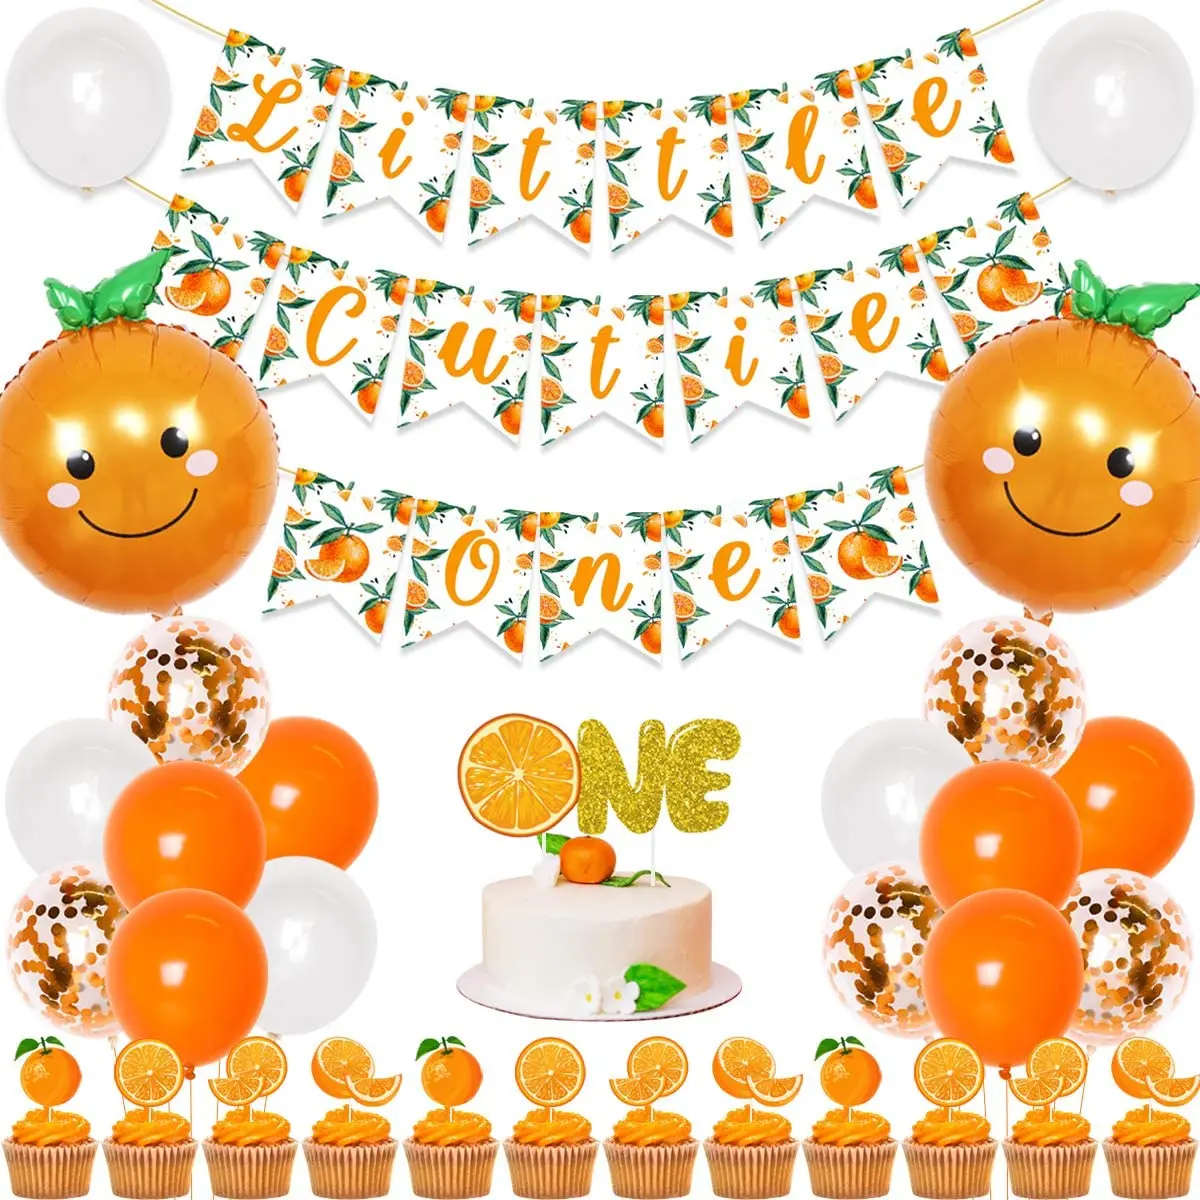 

Little Cutie 1st Birthday Decorations, One Banner, Orange, Citrus, Cake Toppers, Balloons for Tangerine Theme, First Birthday